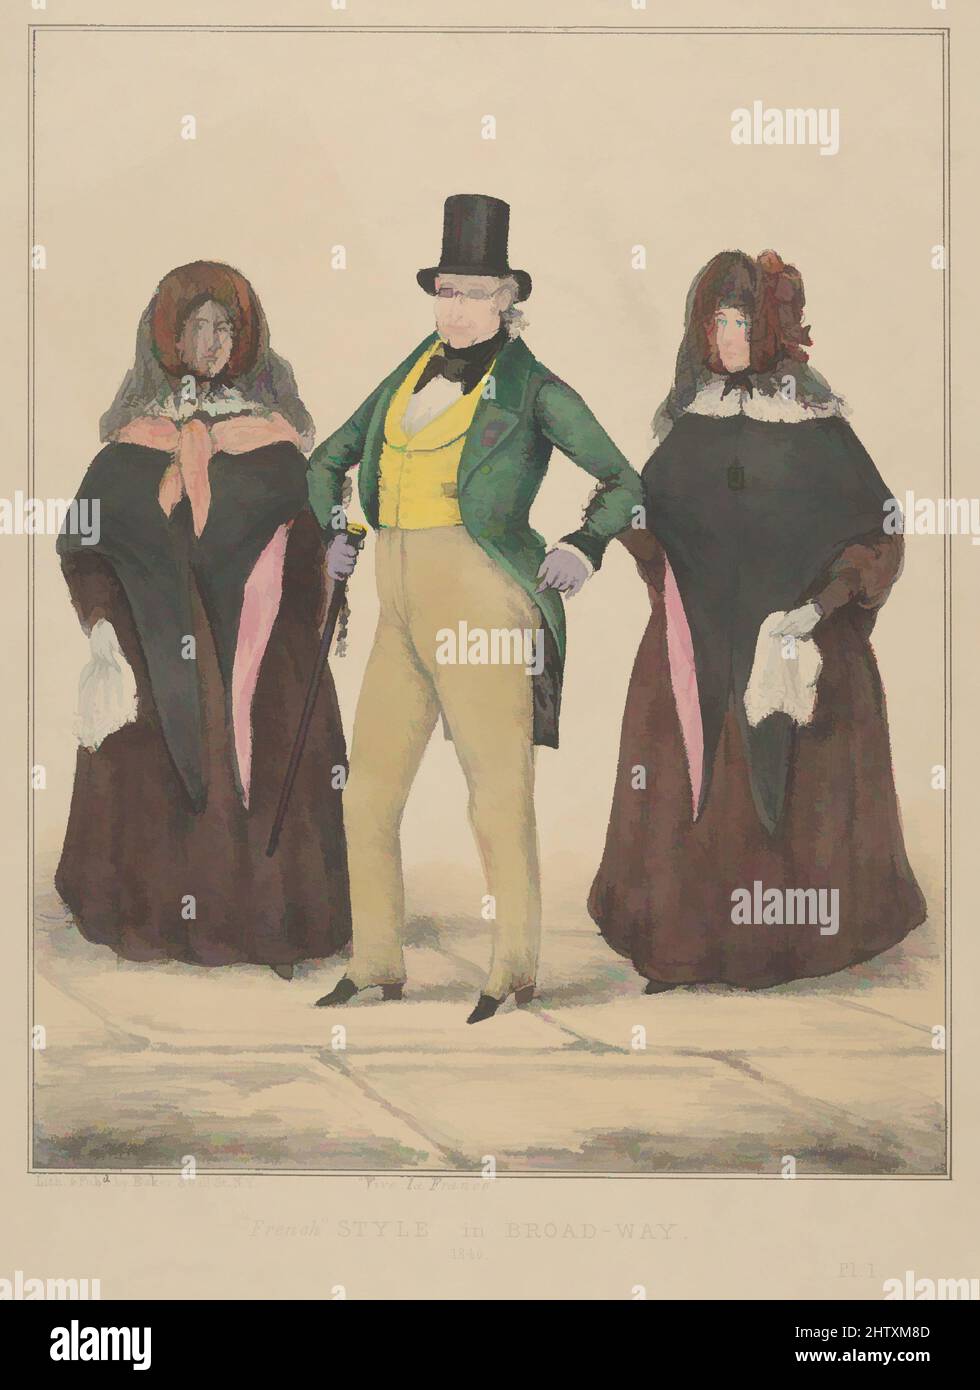 Art inspired by Vive la France, 'French' Style in Broadway, 1840, Lithograph, hand colored, sheet: 14 1/8 x 10 9/16 in. (35.8 x 26.8 cm), Prints, Classic works modernized by Artotop with a splash of modernity. Shapes, color and value, eye-catching visual impact on art. Emotions through freedom of artworks in a contemporary way. A timeless message pursuing a wildly creative new direction. Artists turning to the digital medium and creating the Artotop NFT Stock Photo